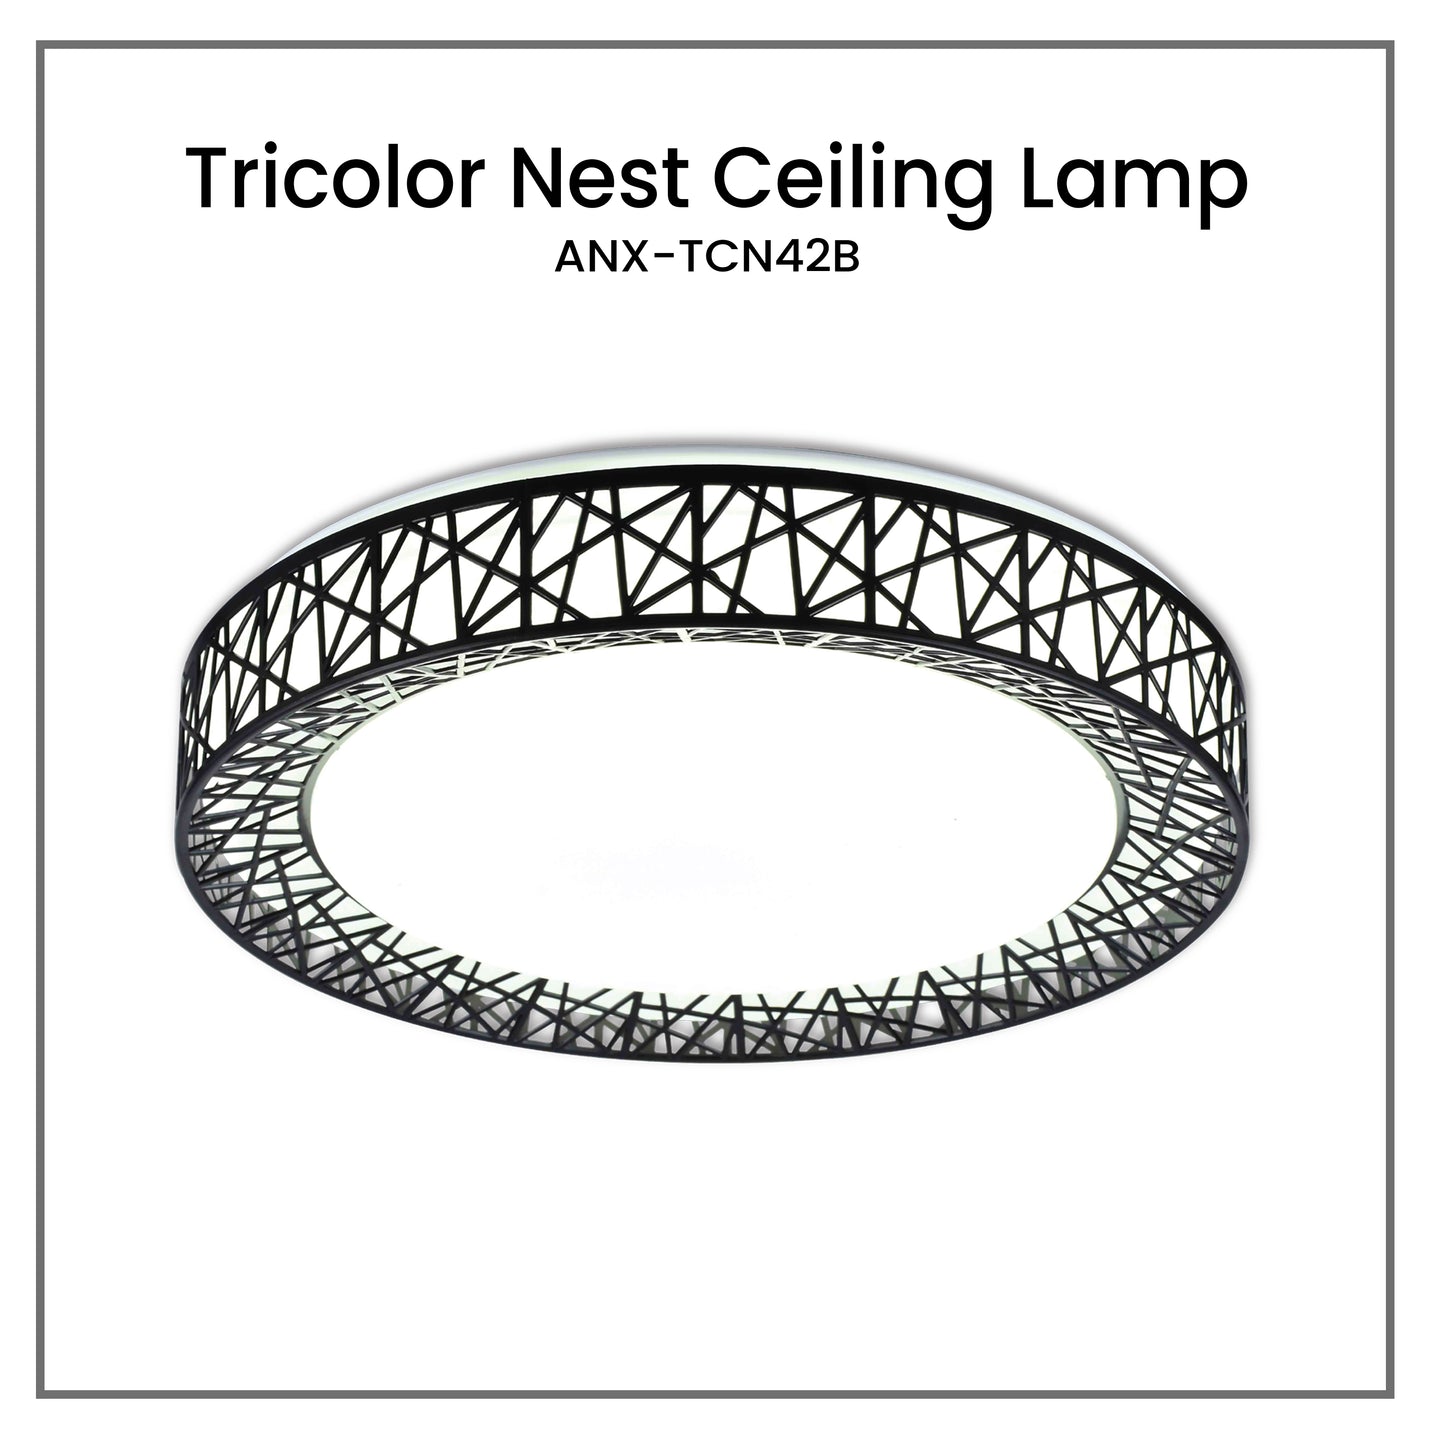 Nxled Nest Ceiling Tri-Color Light (ANX-TCN42B)